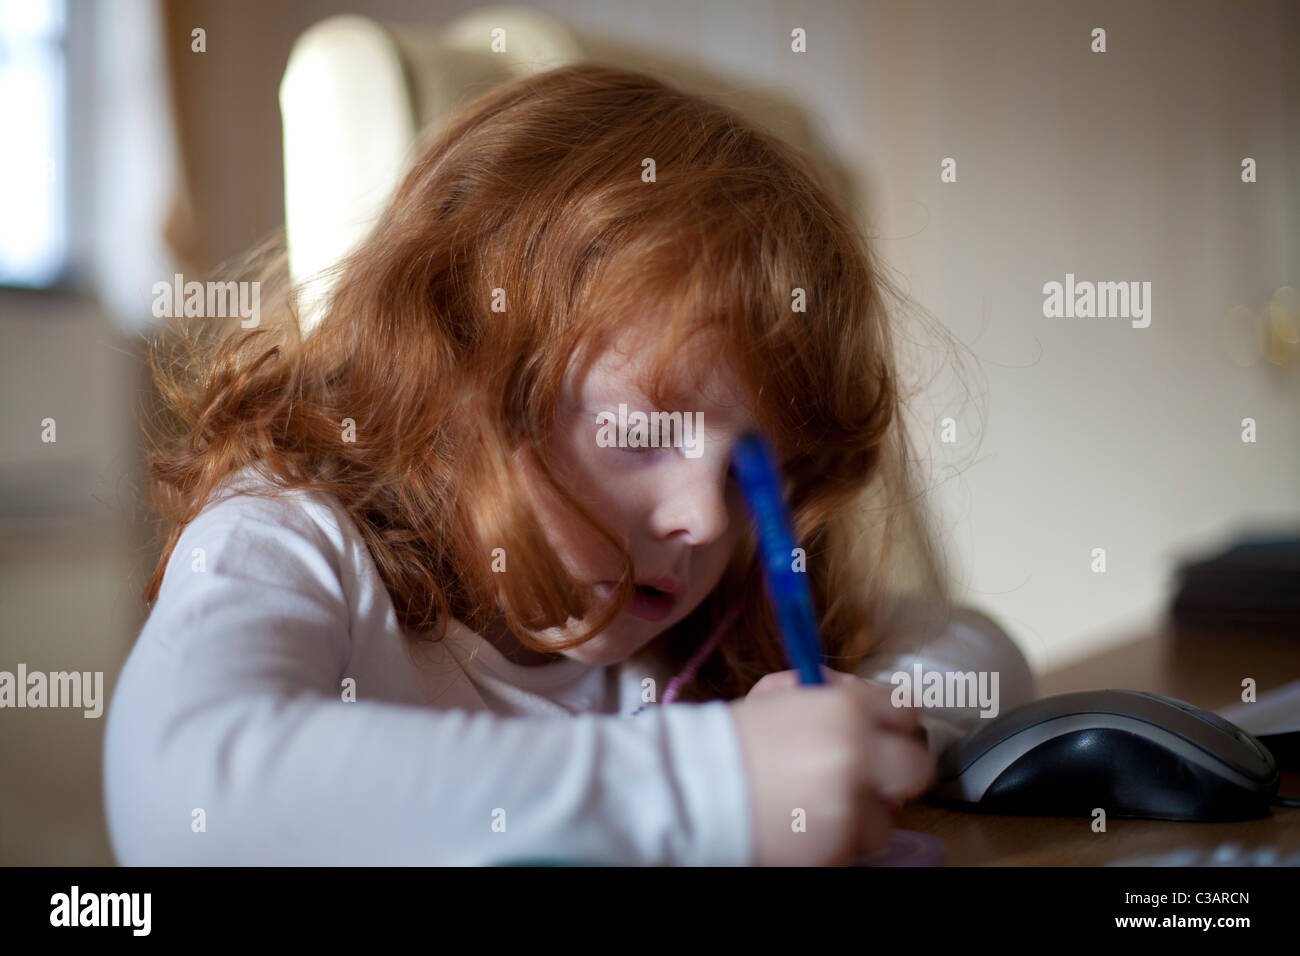 A 4 year old girl with ginger hair writing at a desk Stock Photo